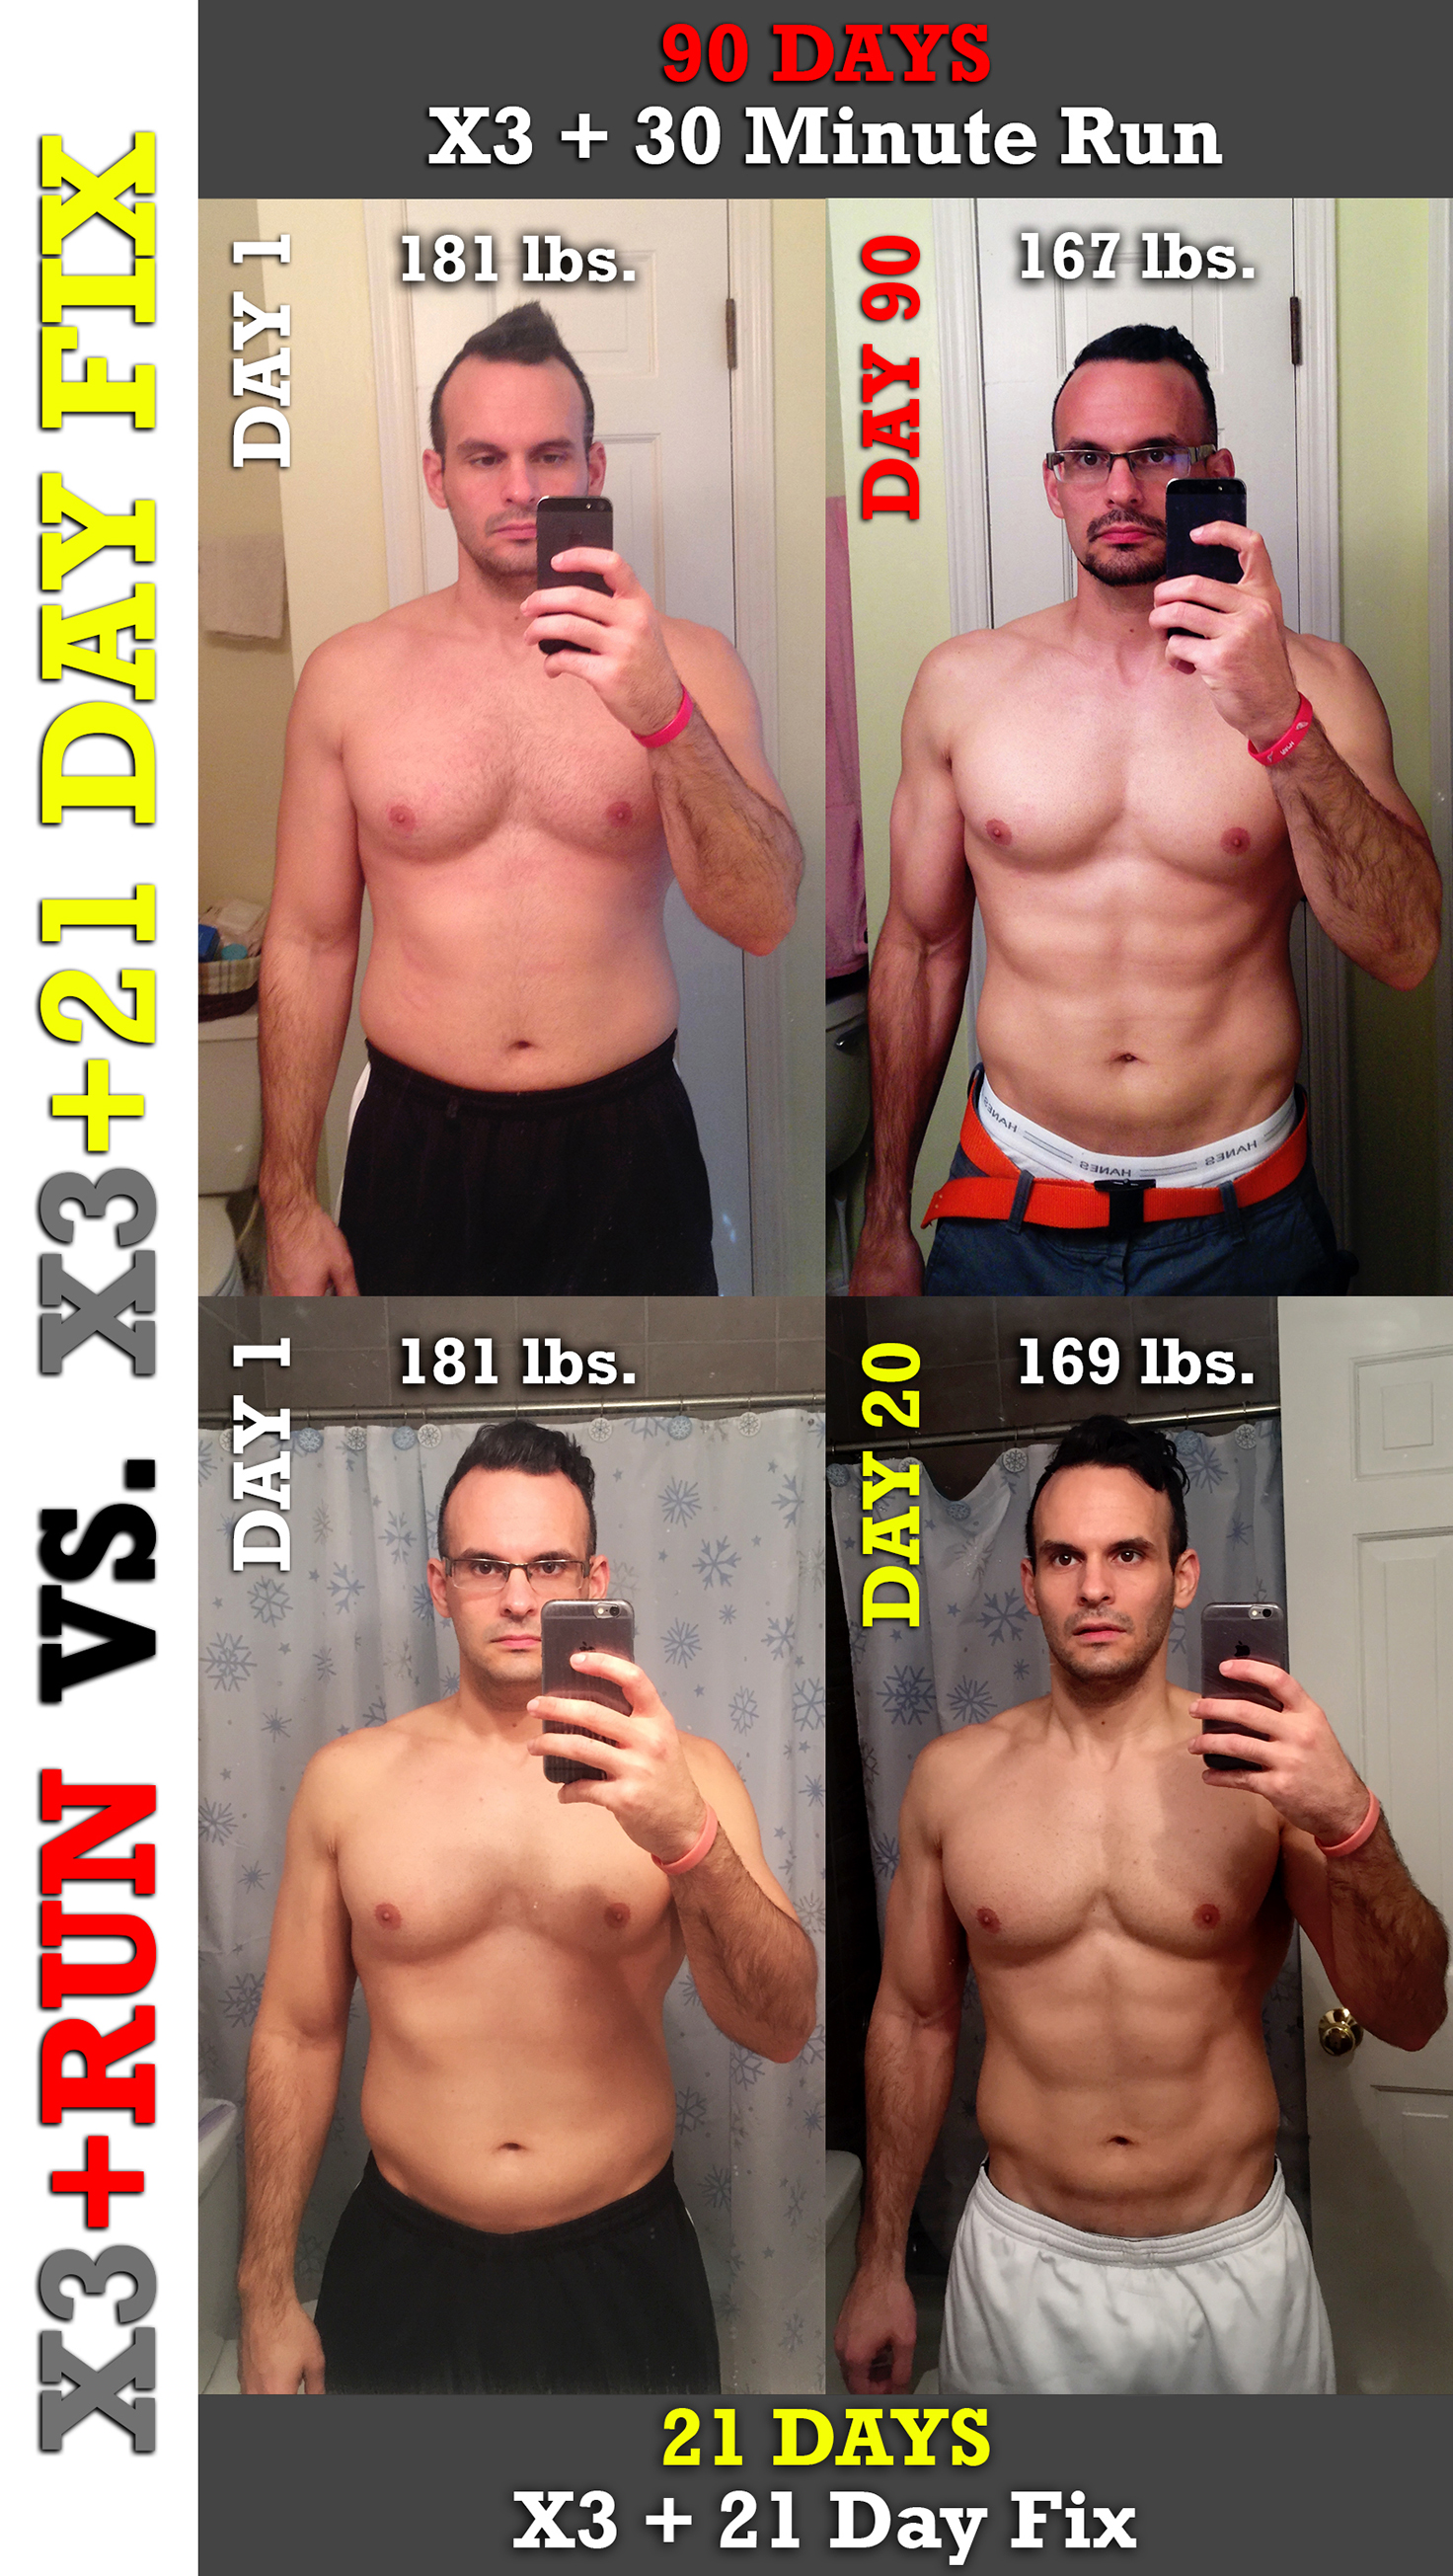 21 Day Fix P90X3 vs X3 Run Before And After